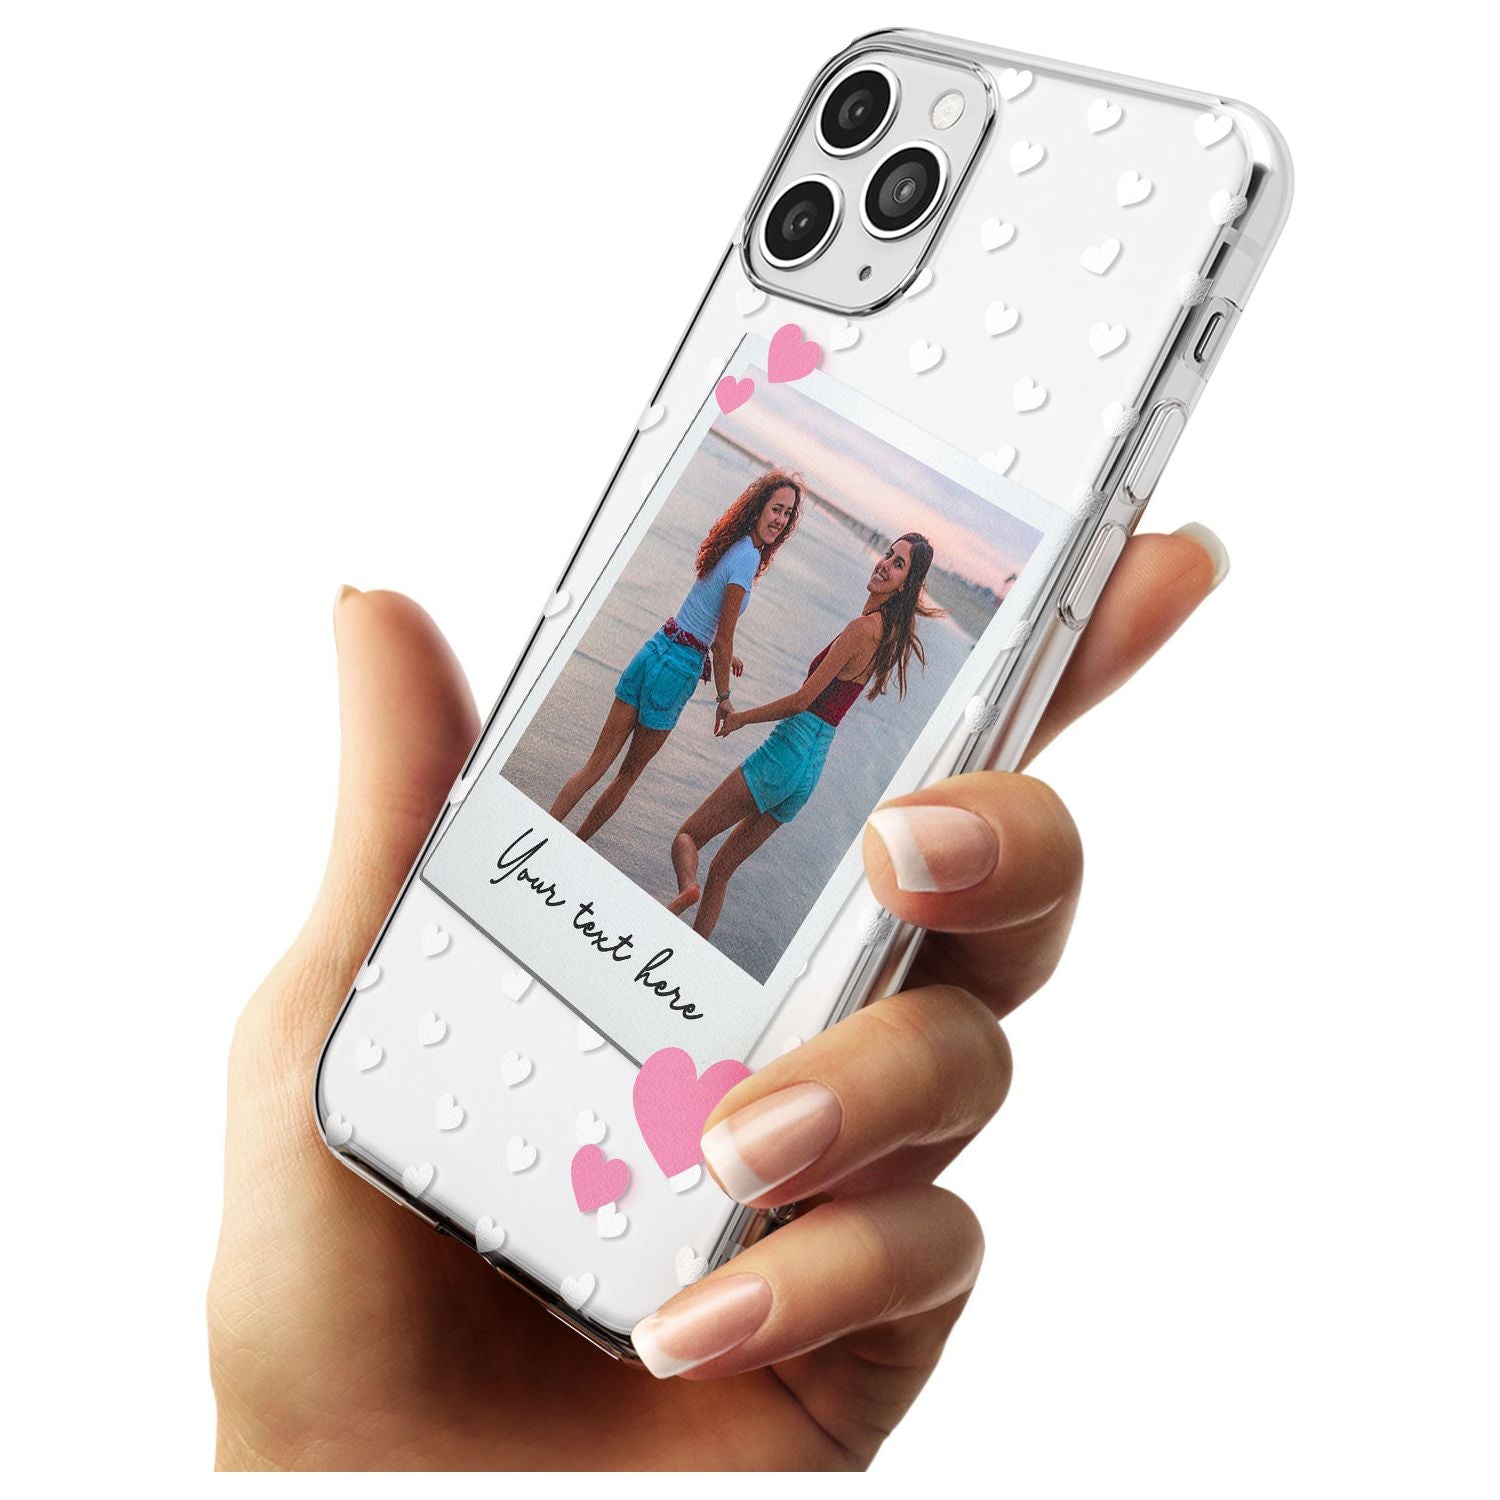 Instant Film & Hearts Black Impact Phone Case for iPhone 11 Pro Max